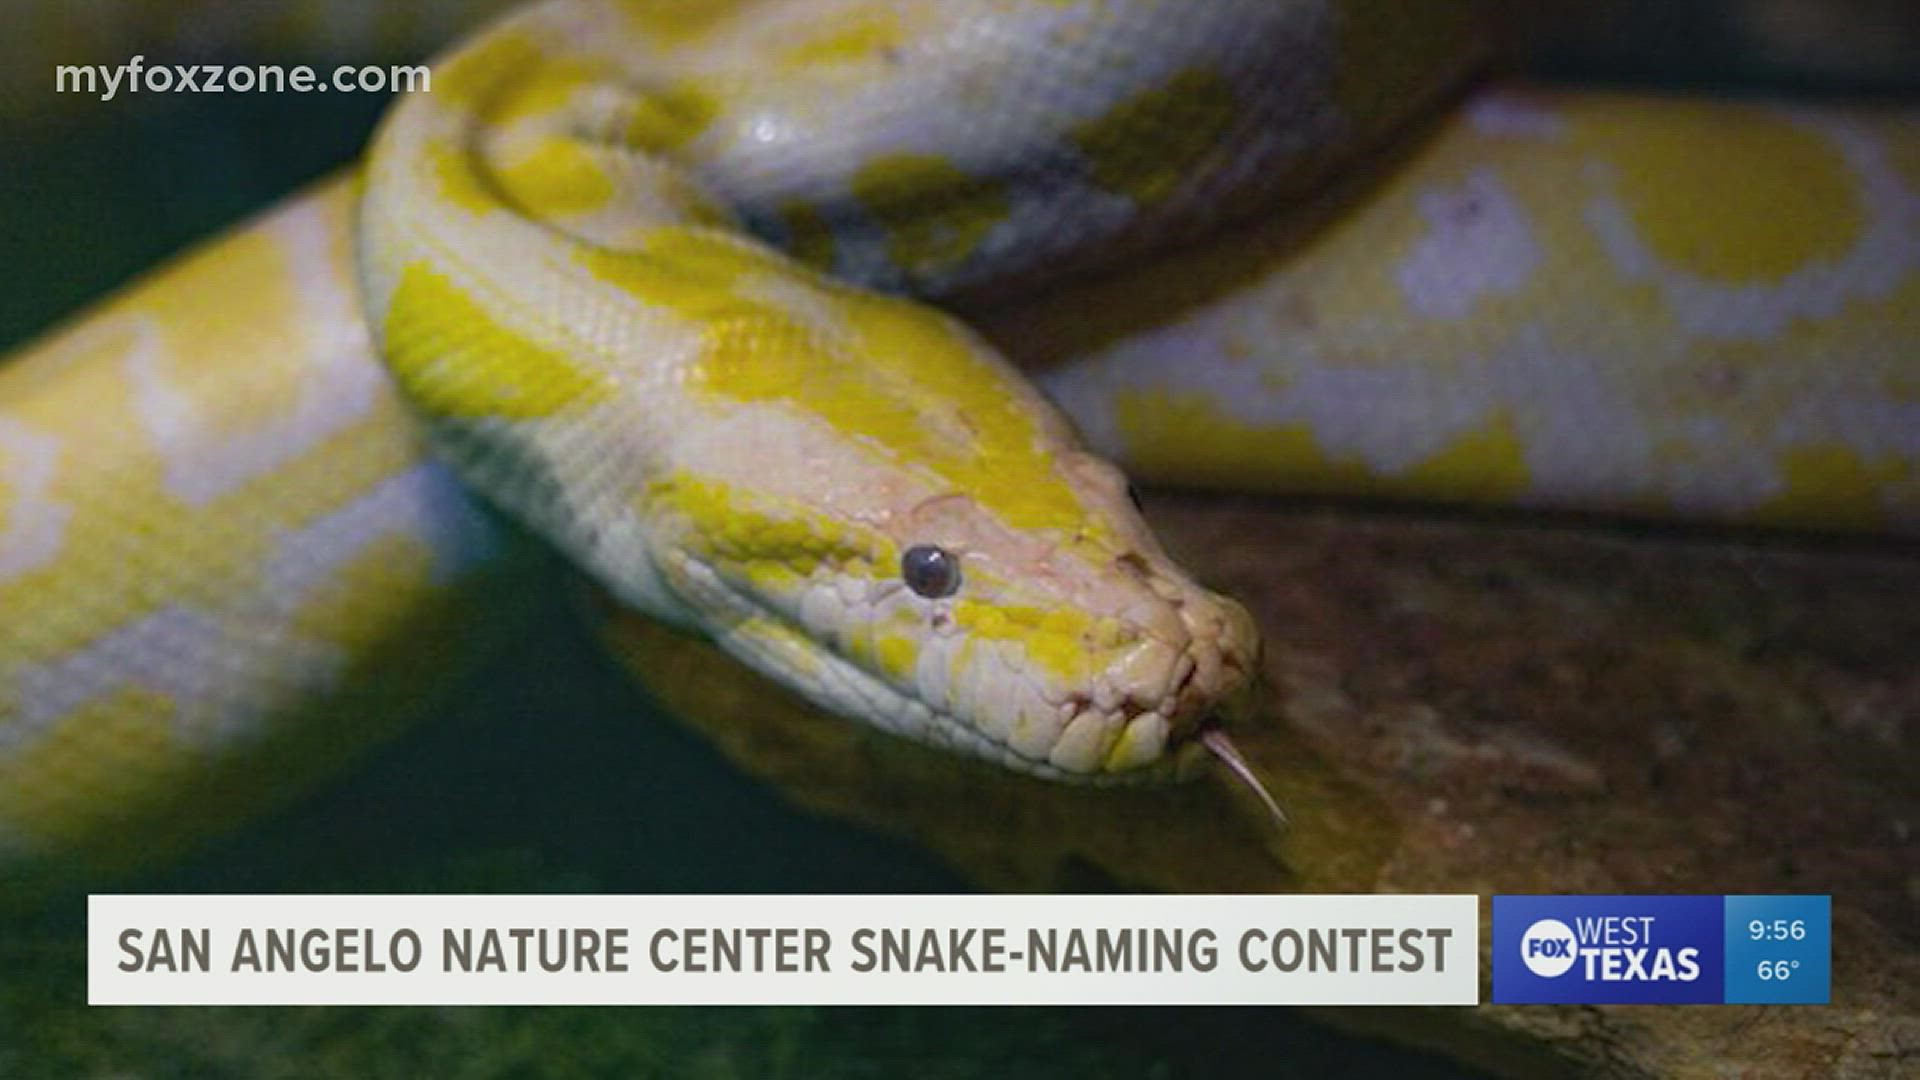 The center said the snake is somewhere between 5-7 years old and weighs 65 pounds.